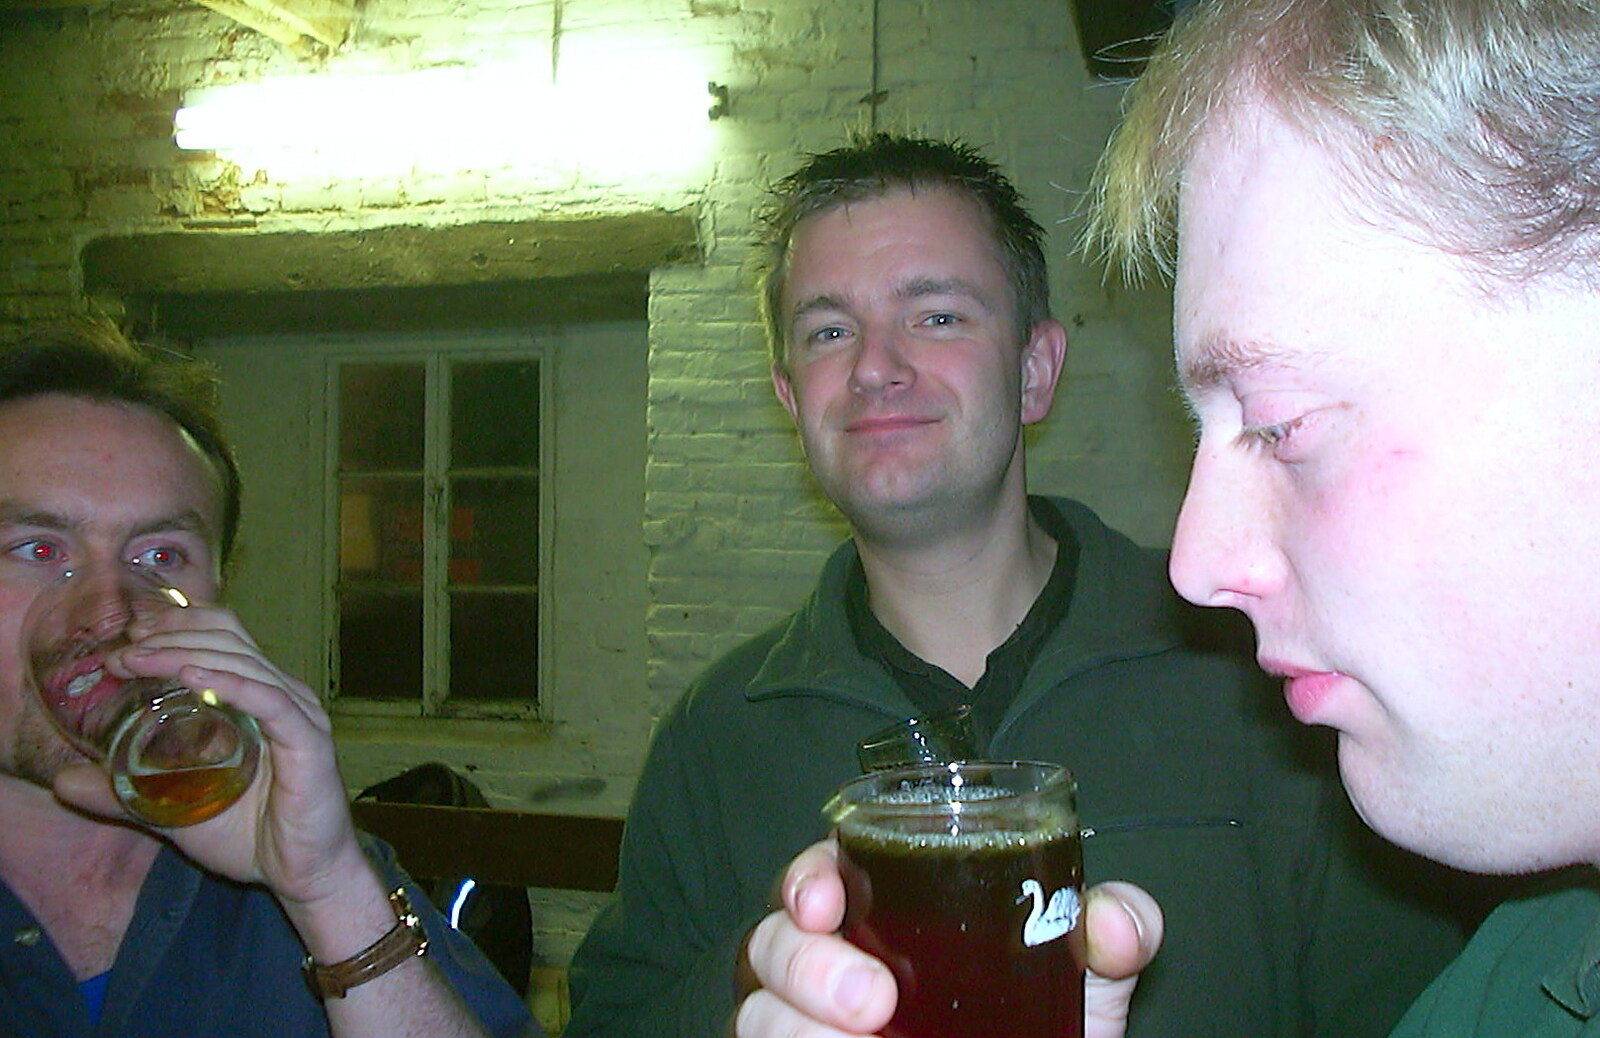 Nosher from The Hoxne Beer Festival, Suffolk - 20th May 2002